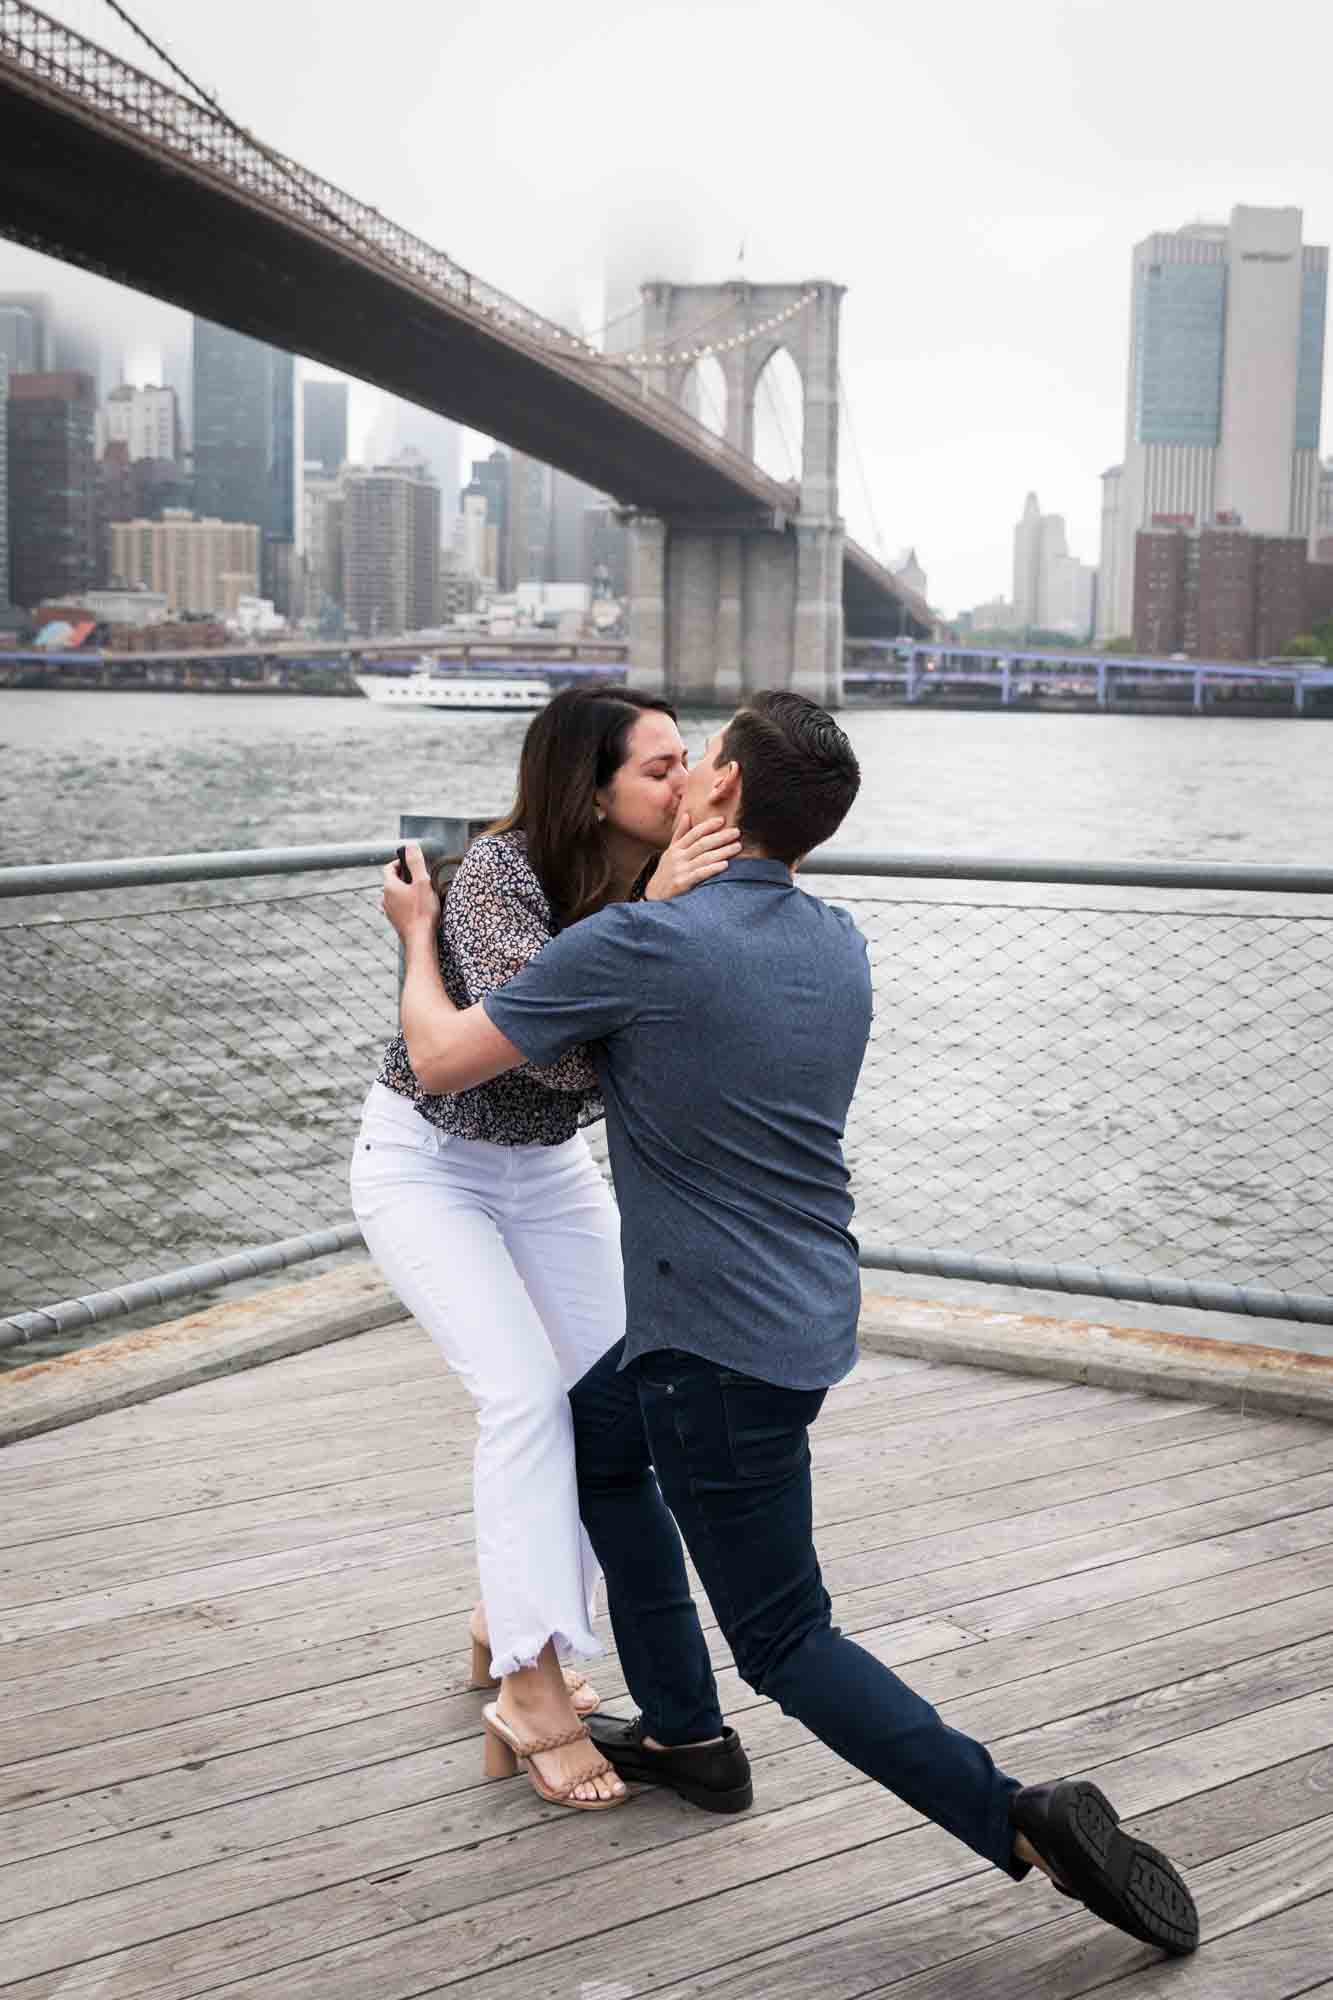 Woman kissing man on boardwalk in front of Brooklyn Bridge for an article on Brooklyn Bridge Park rainy day photo locations